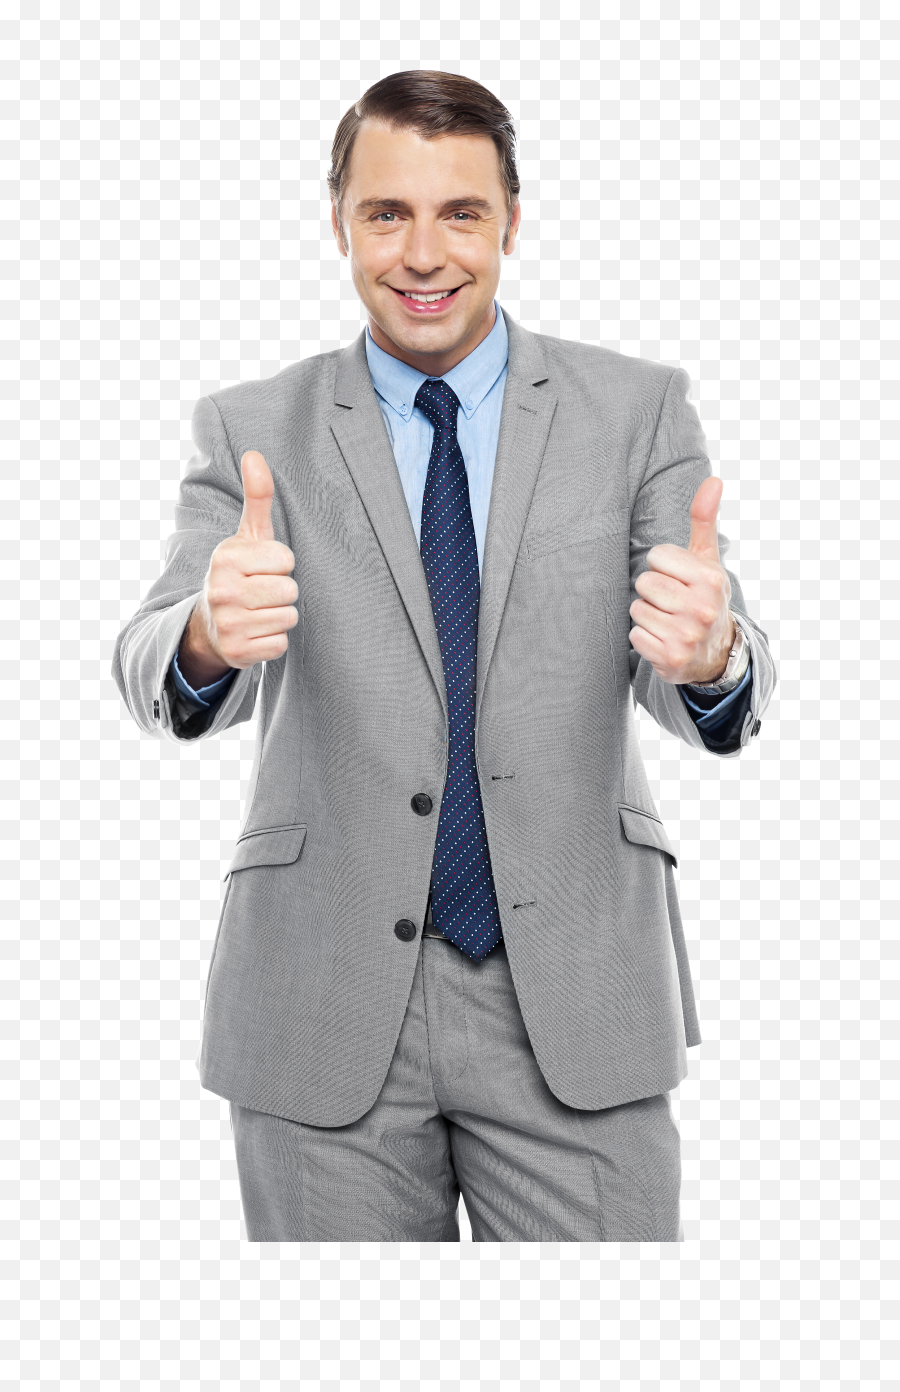 Men Pointing Thumbs Up Png Image - Men With Thumbs Up,Thumb Up Png